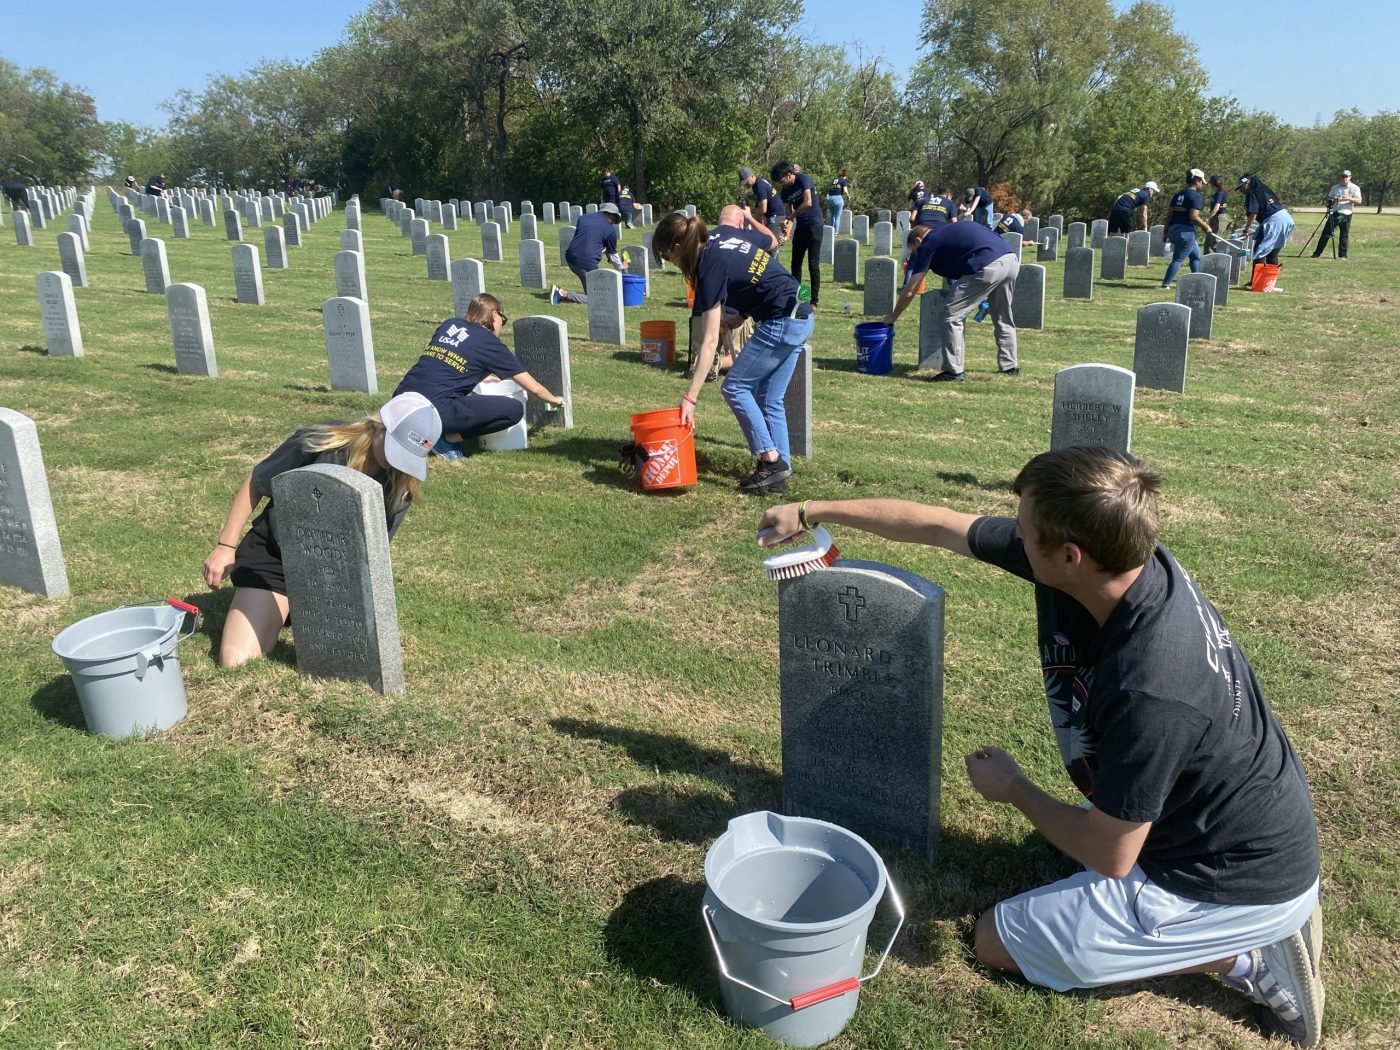 VA’s national cemeteries will host a National Day of Service on September 11 to honor U.S. service members, police officers, fire fighters and first responders on the 22nd anniversary of the 9/11 attacks.